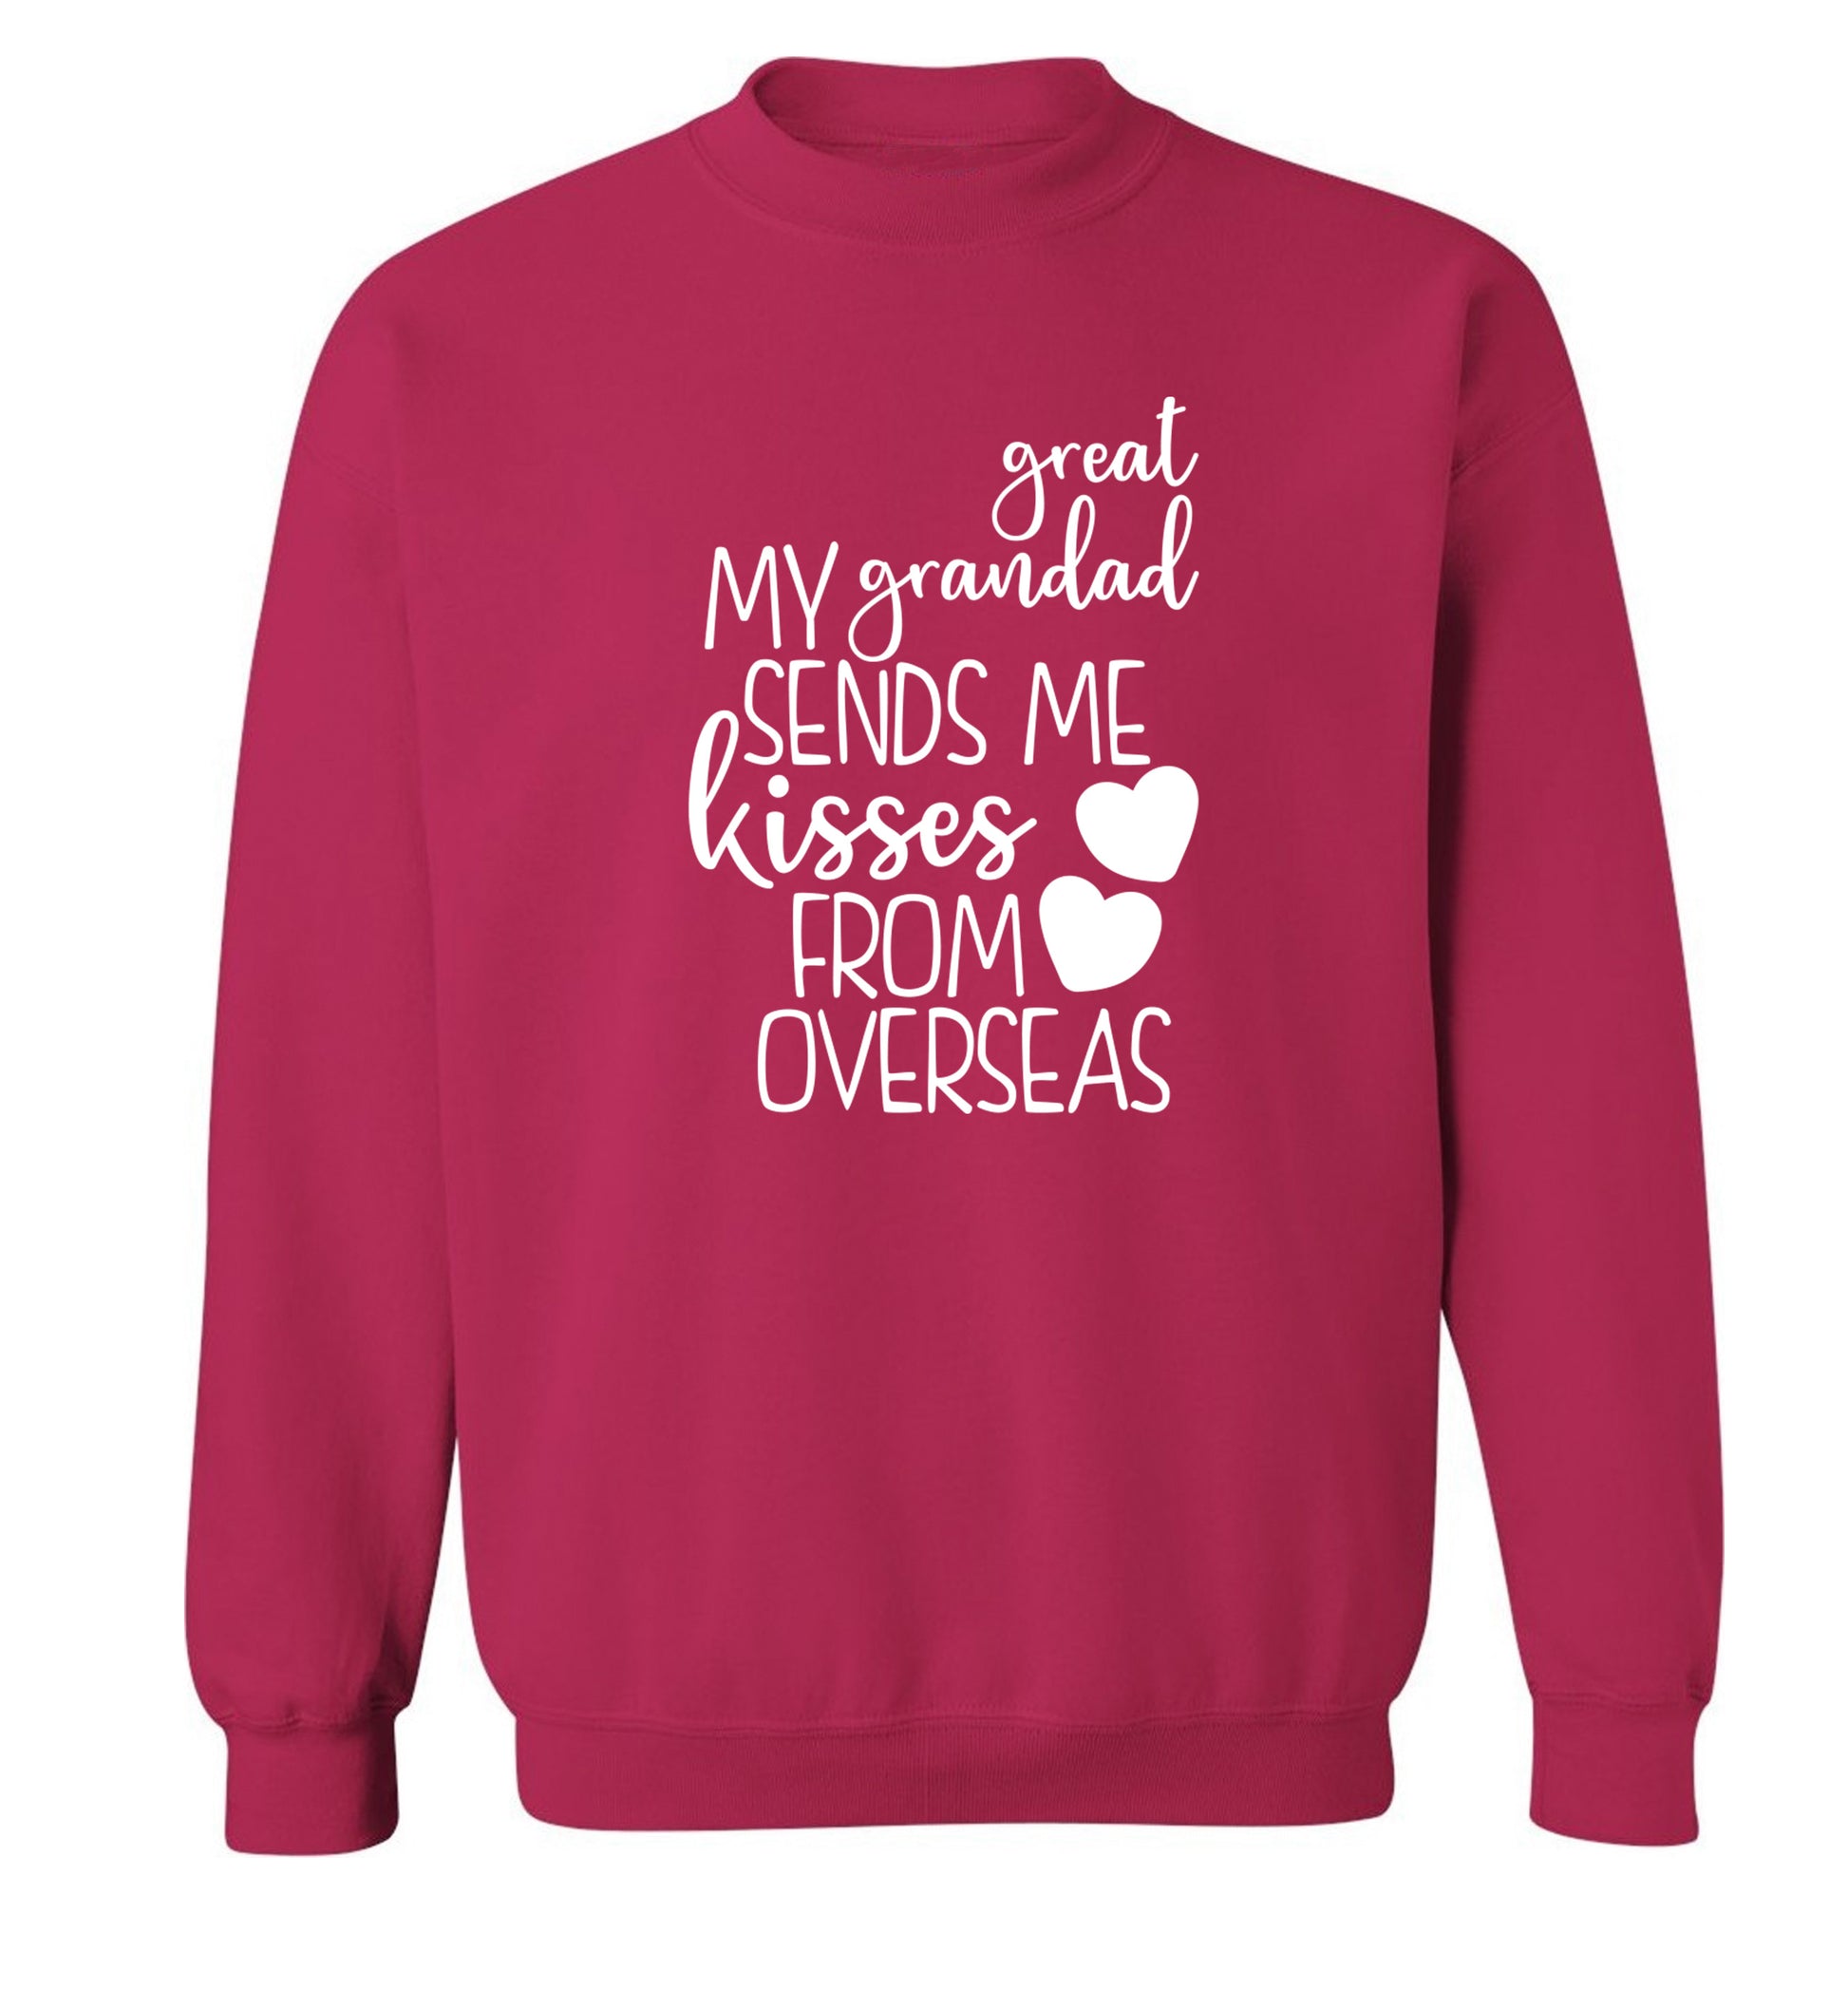 My great grandad sends me kisses from overseas Adult's unisex pink Sweater 2XL